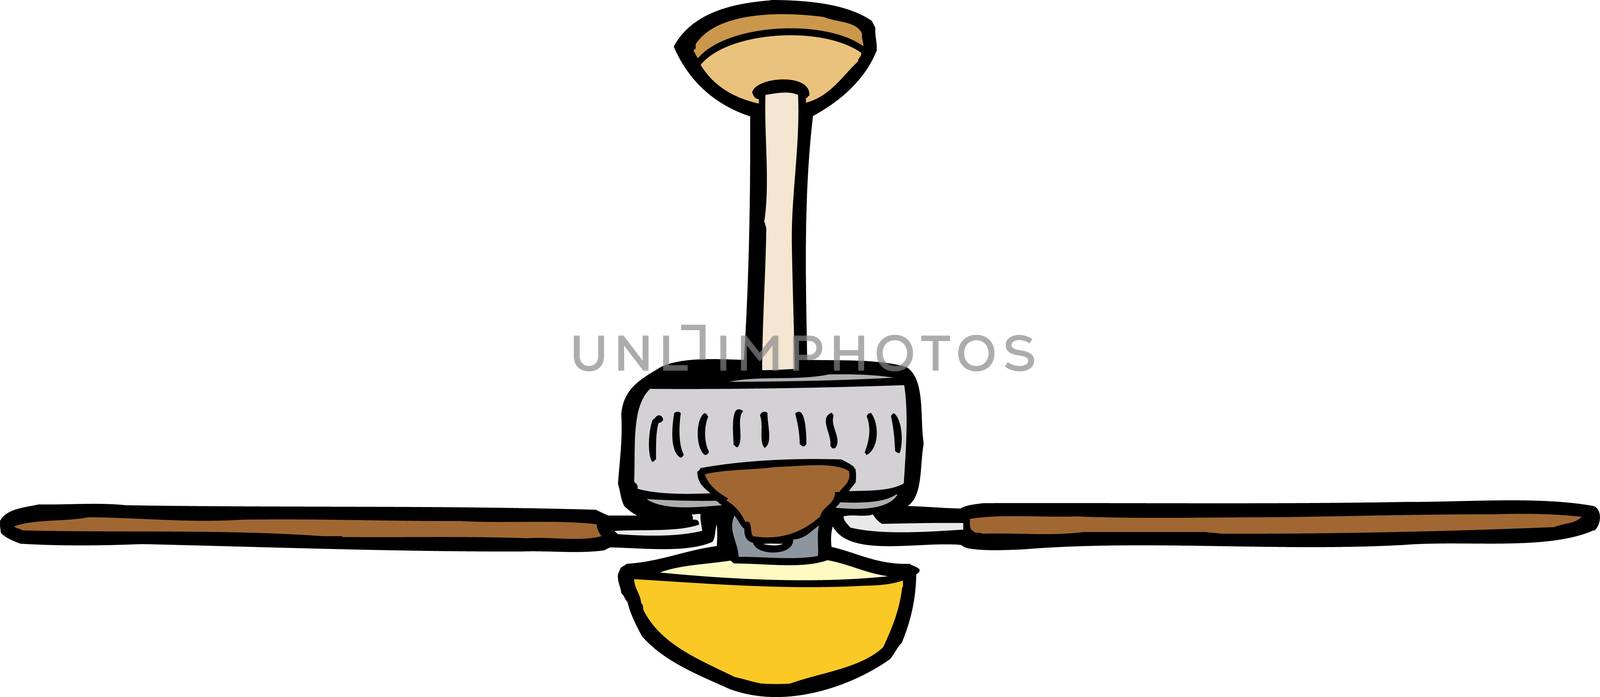 Isolated ceiling fan drawing on white background